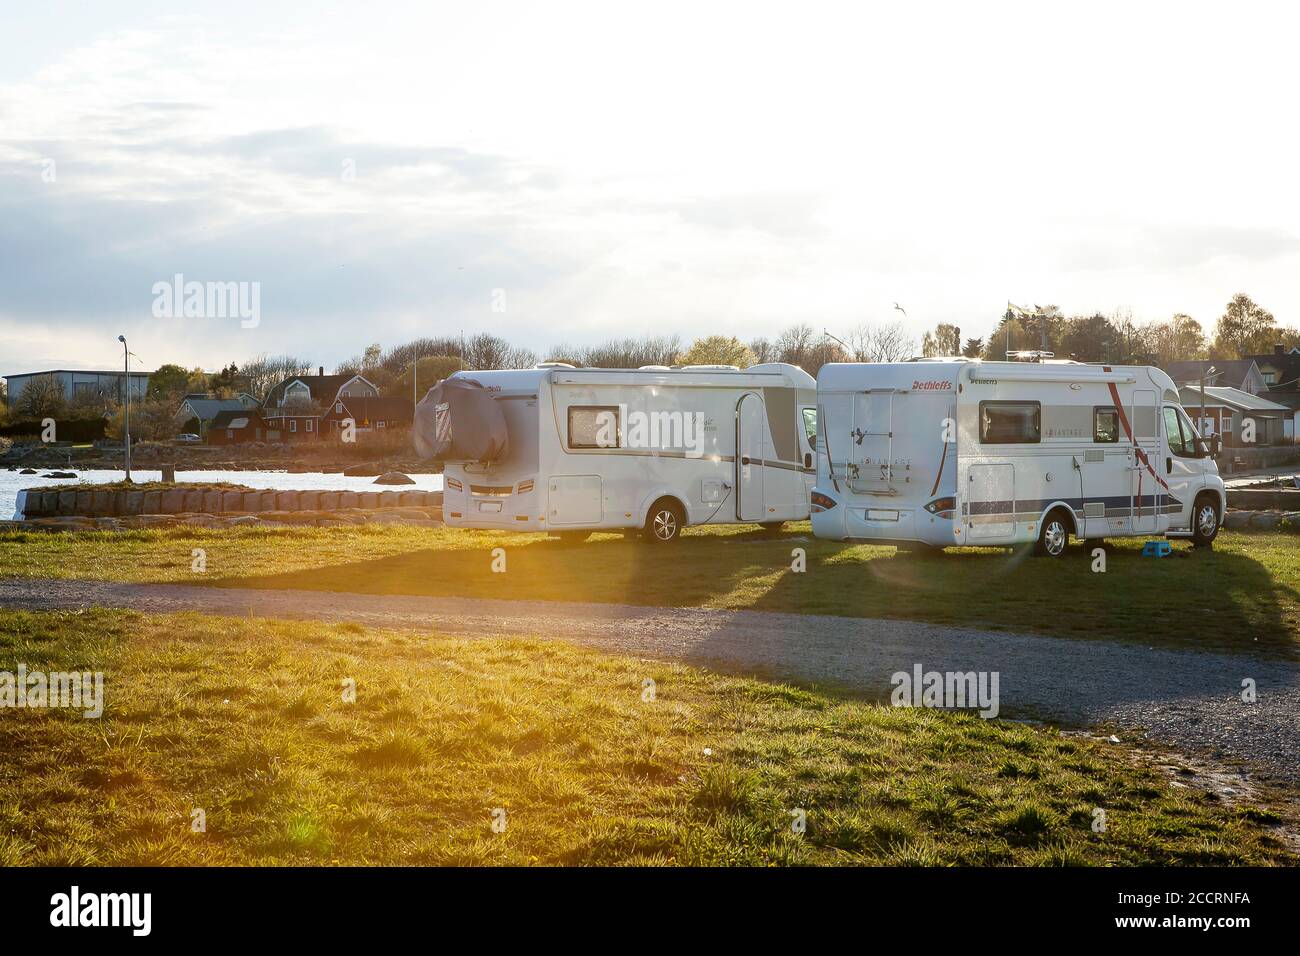 NOGERSUND, SWEDEN - MAY 2, 2014: The motorhome parking at Nogersund is a popular place for staying a couple of nights with a camping car. Stock Photo